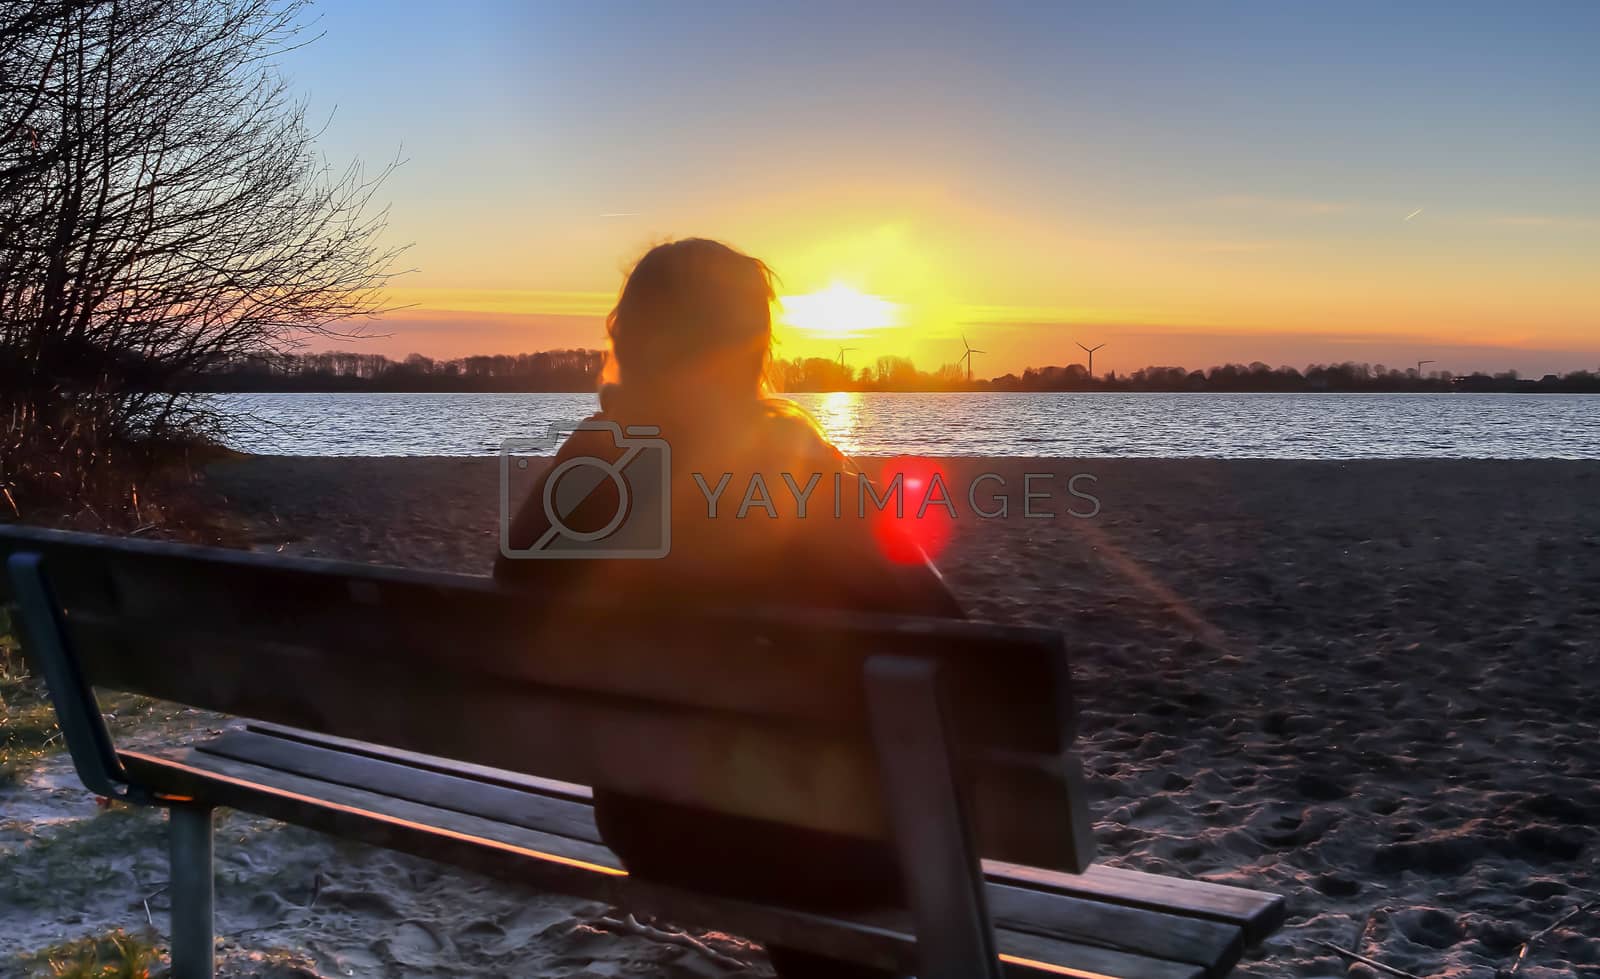 Royalty free image of Beautiful and romantic sunset at a lake in yellow and orange col by MP_foto71